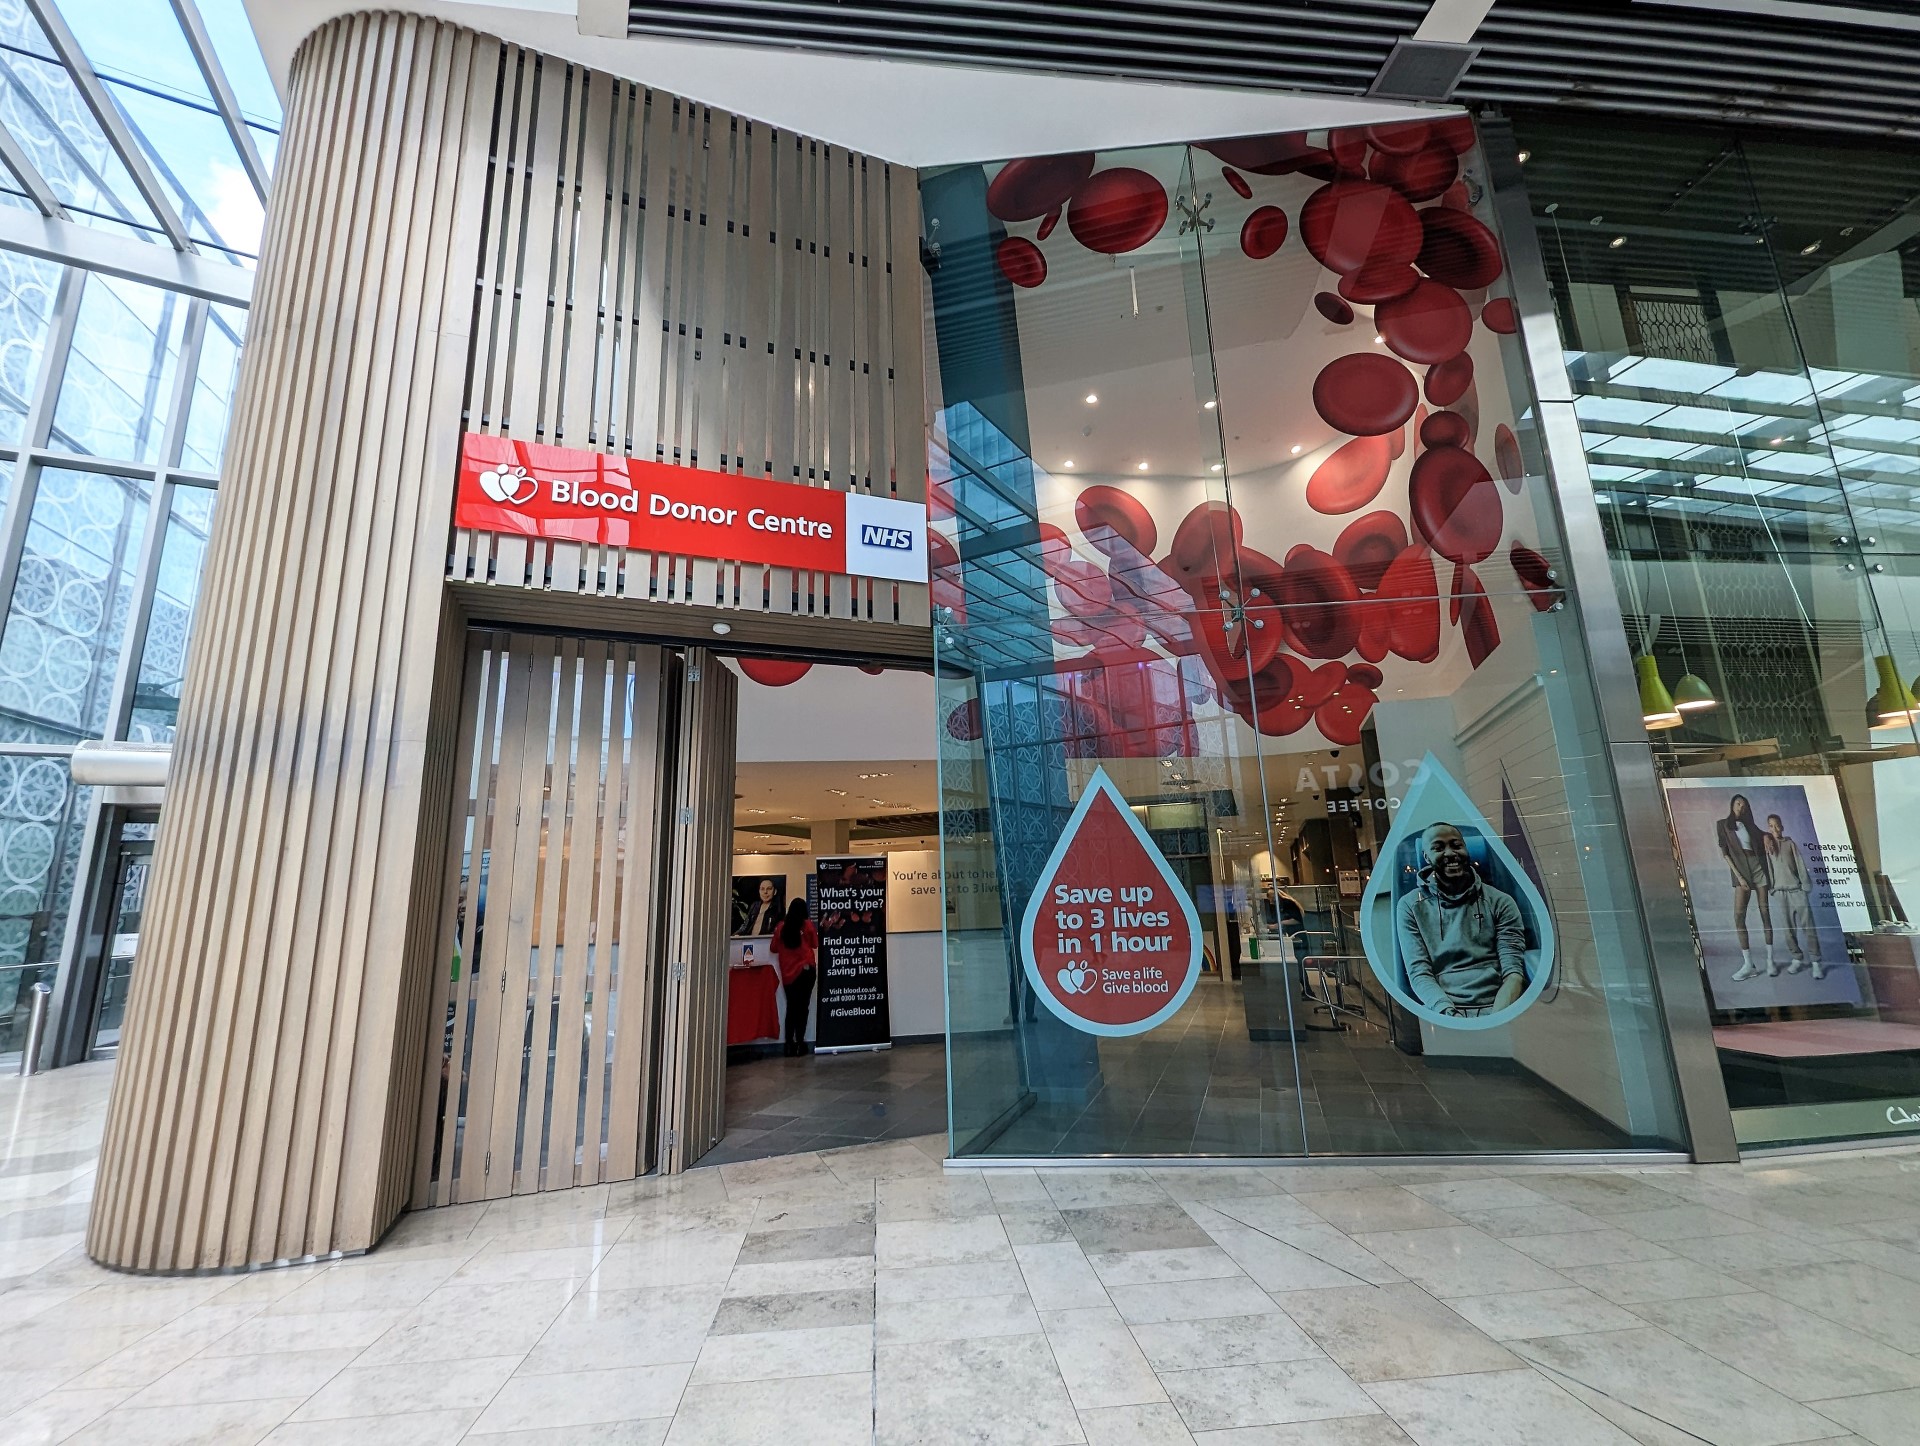 The new Stratford blood donor centre within Westfield Stratford City